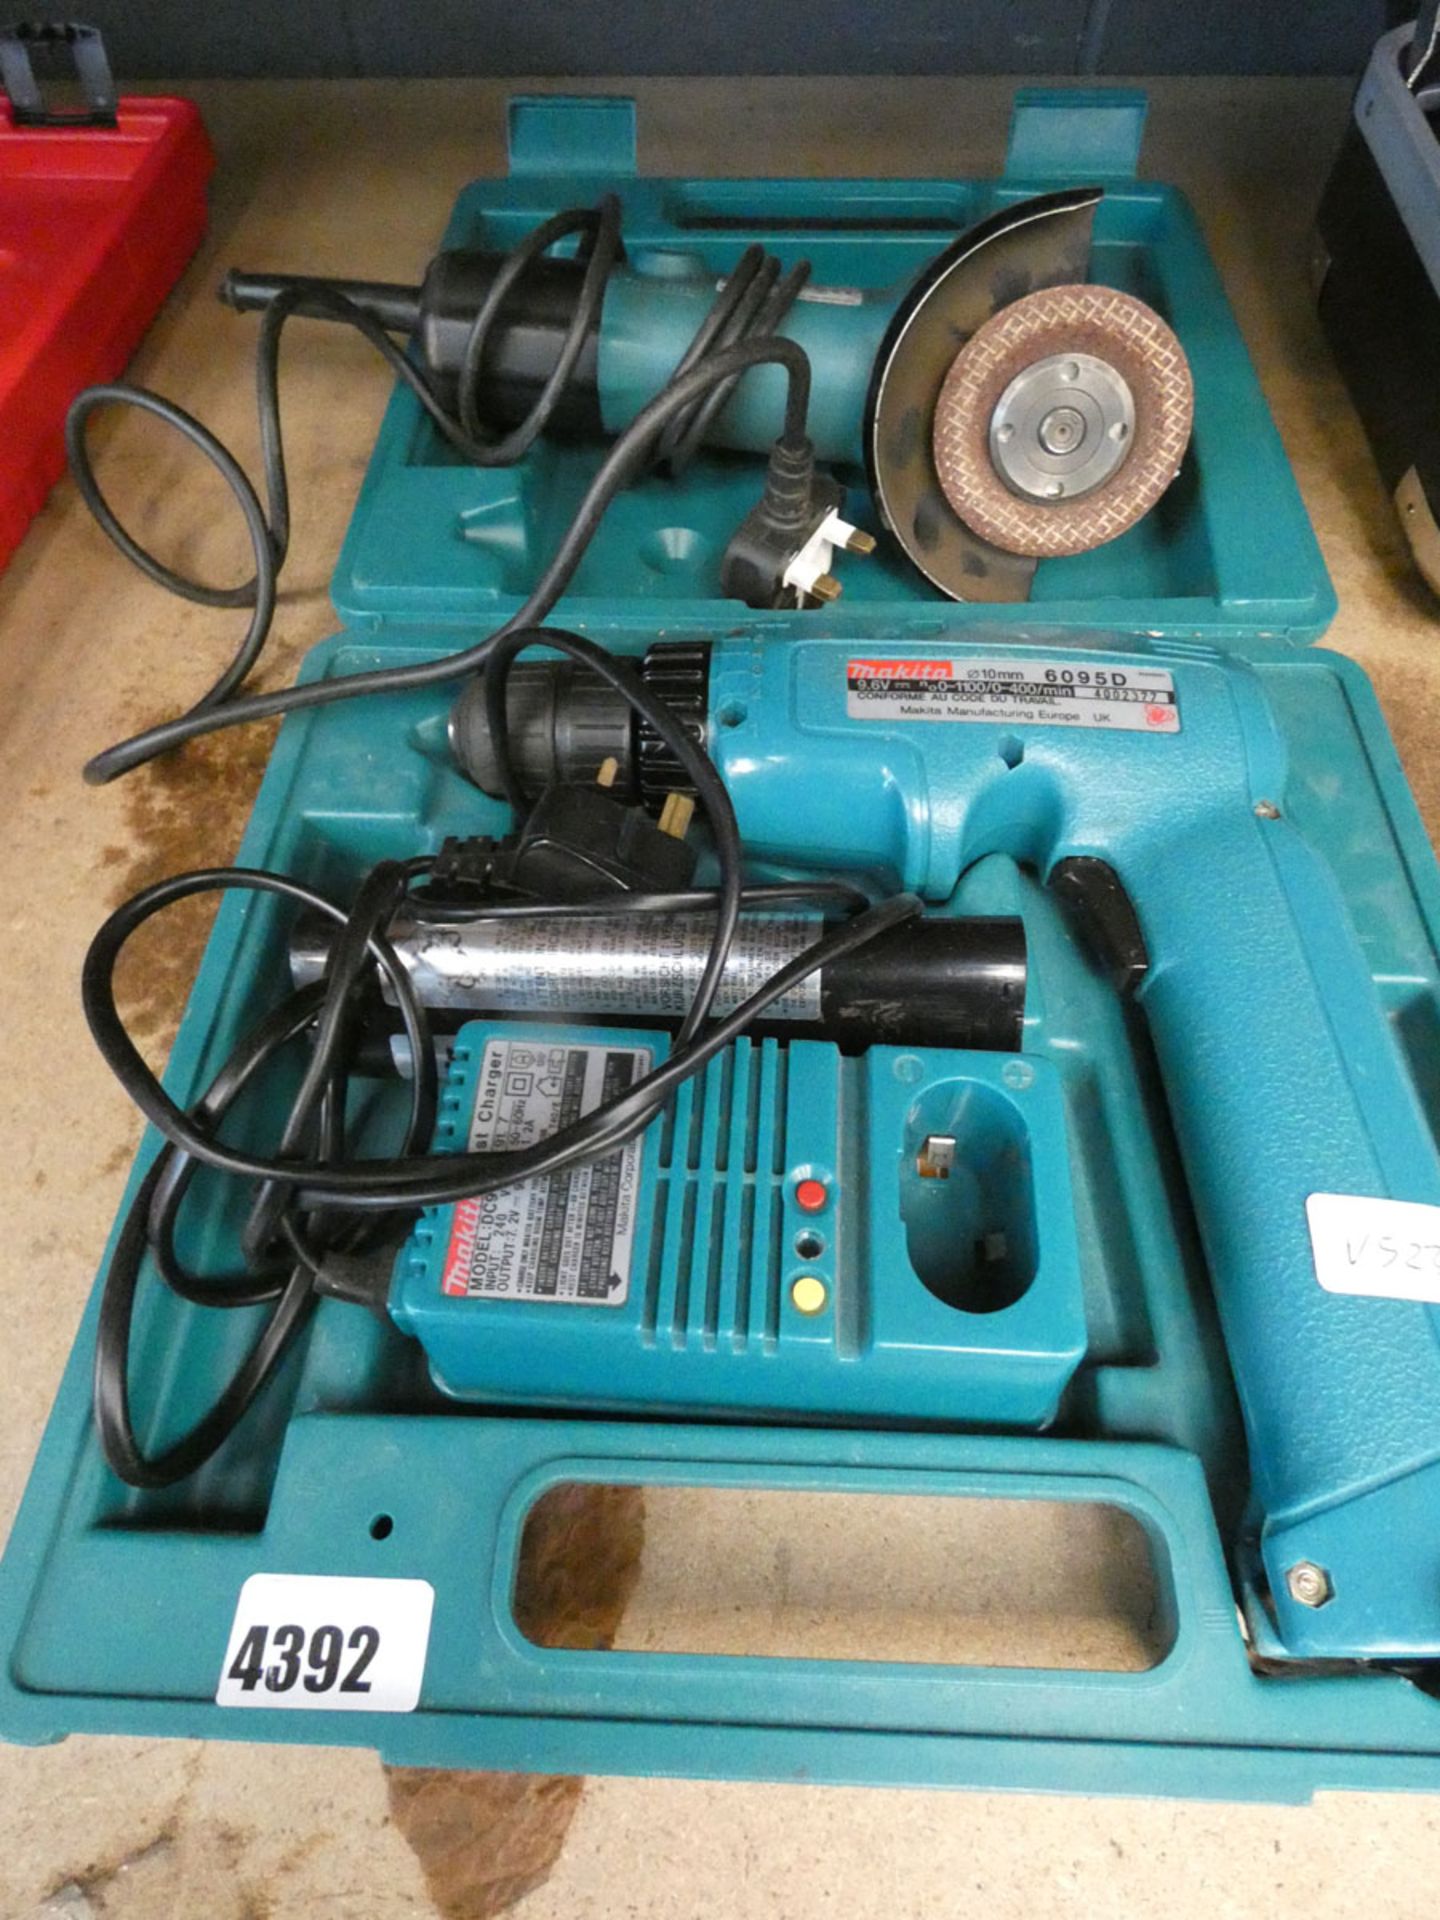 4663 - Makita battery drill with 2 batteries and charger and a Makita angle grinder